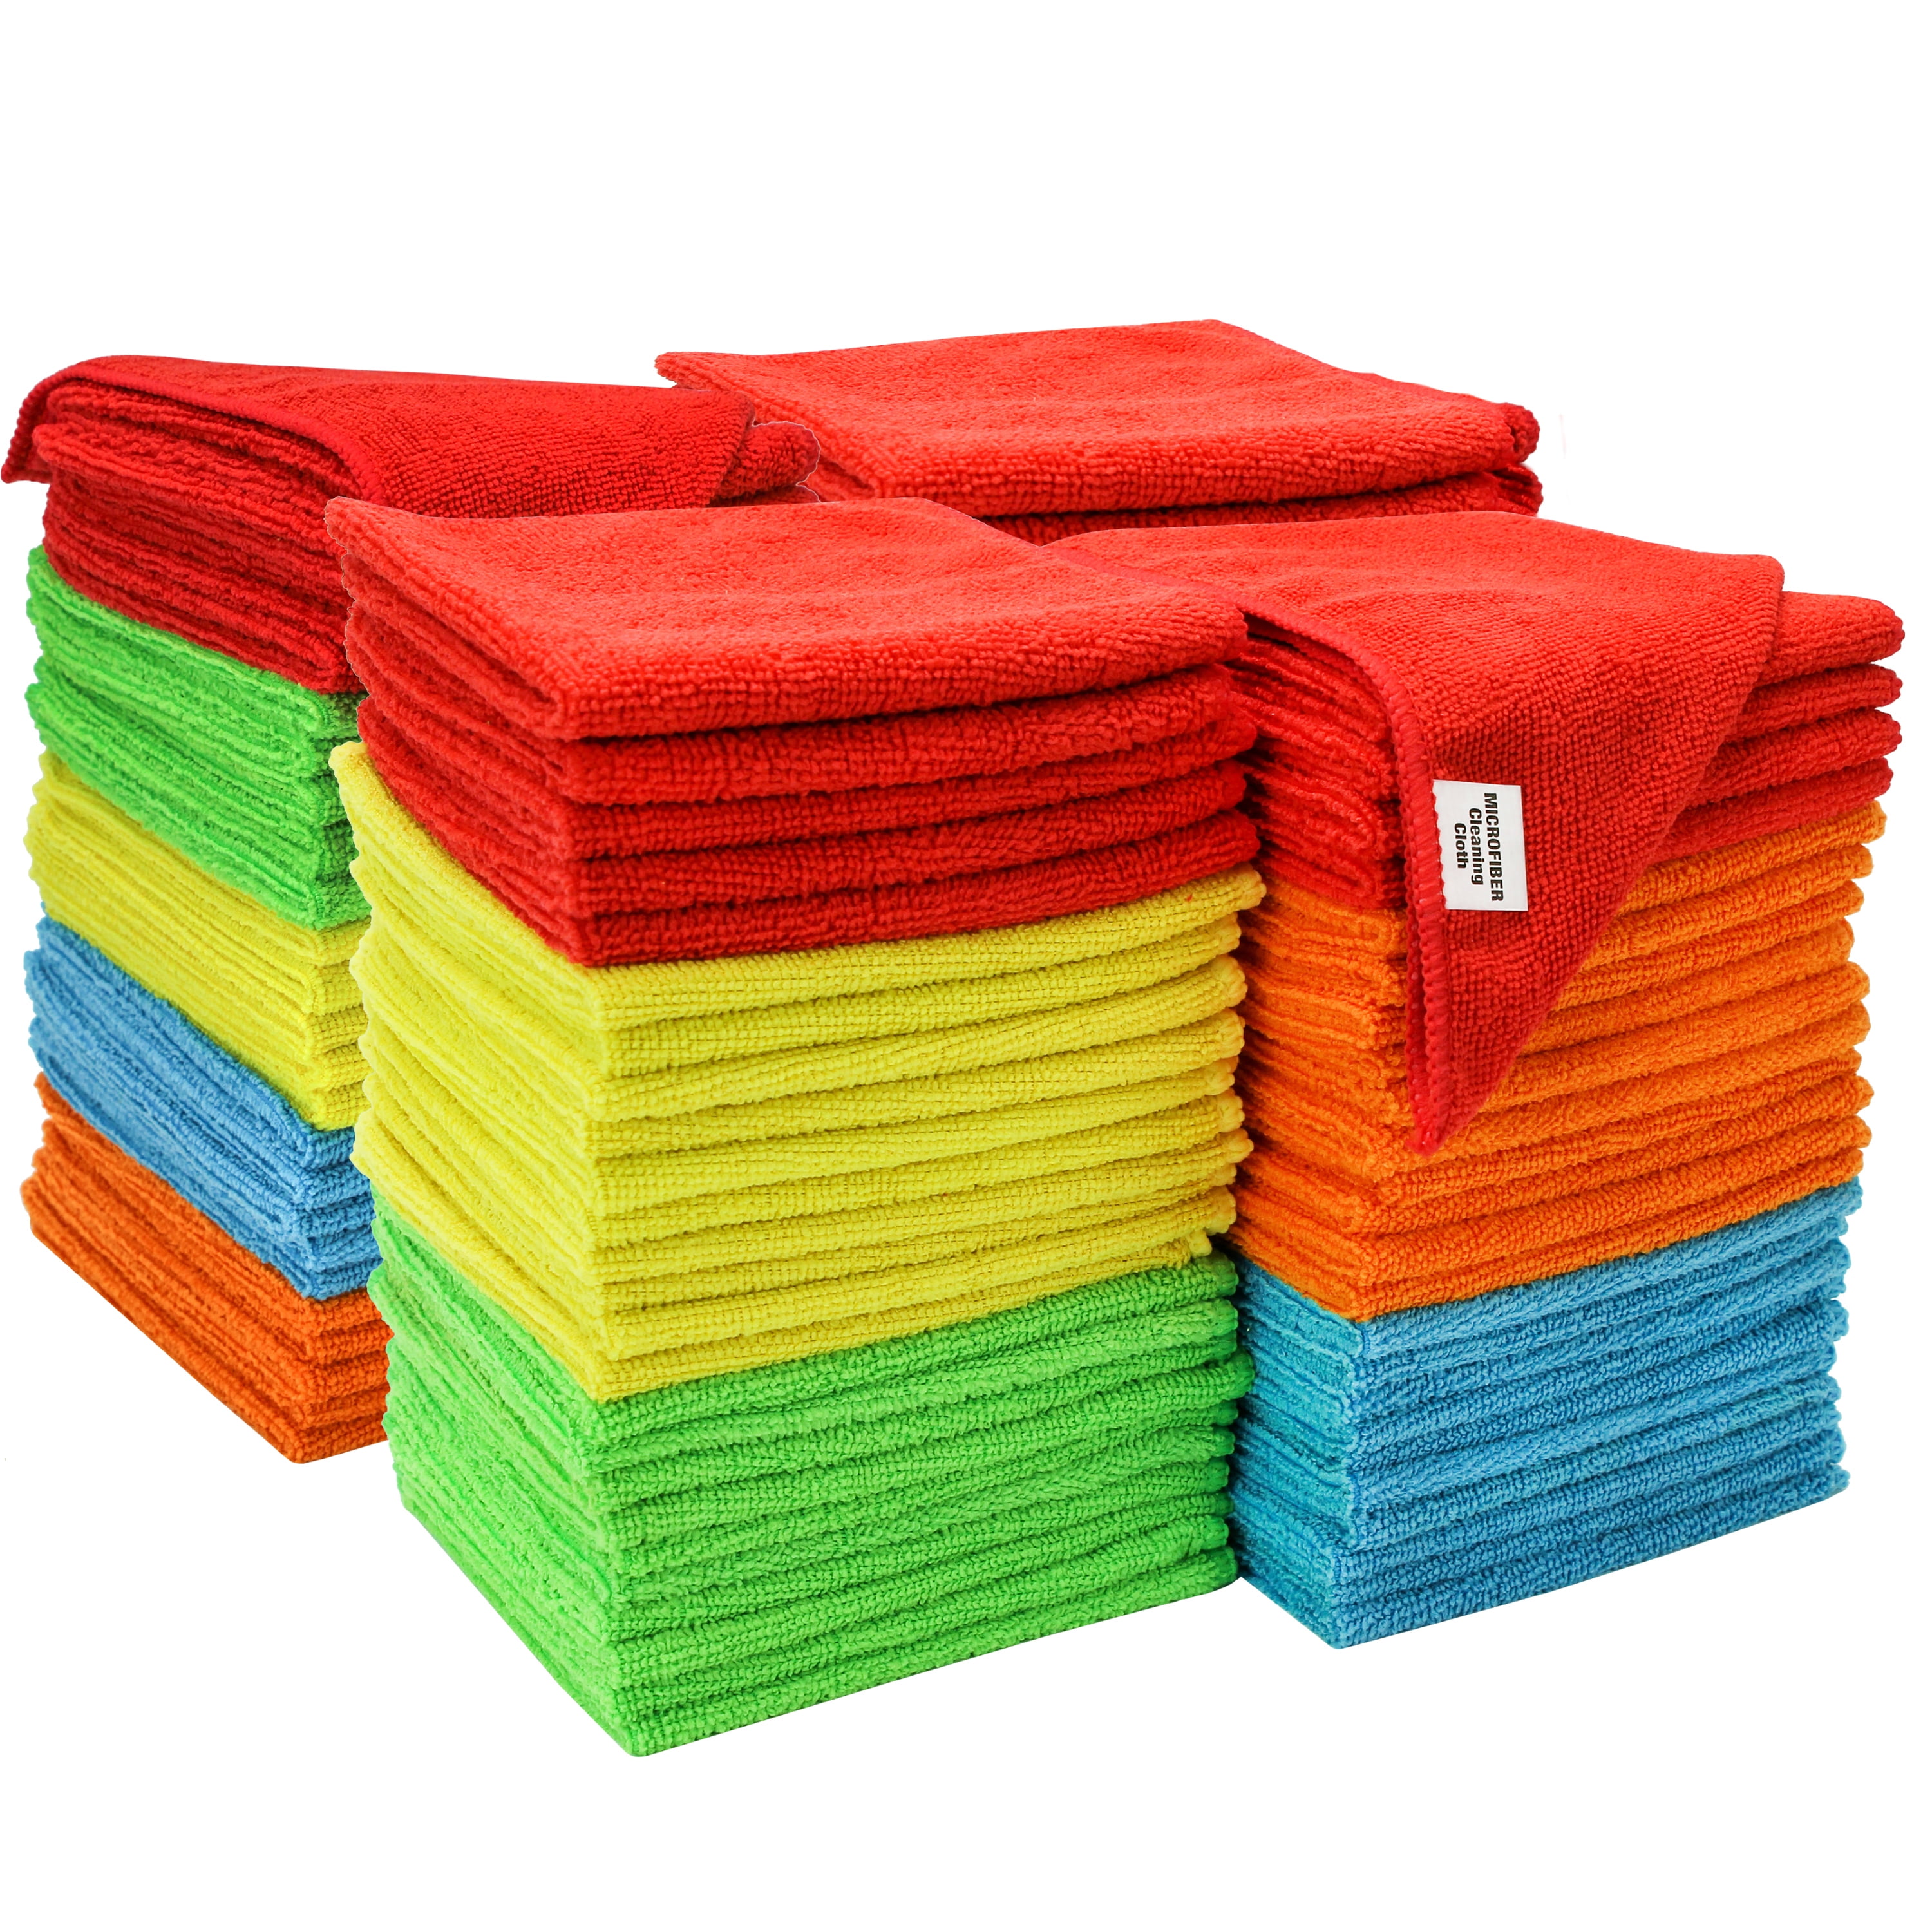 Bulk Lot of 50 Microfiber Cleaning Towel Rags Assorted Colors 12 x 12 Reusable 